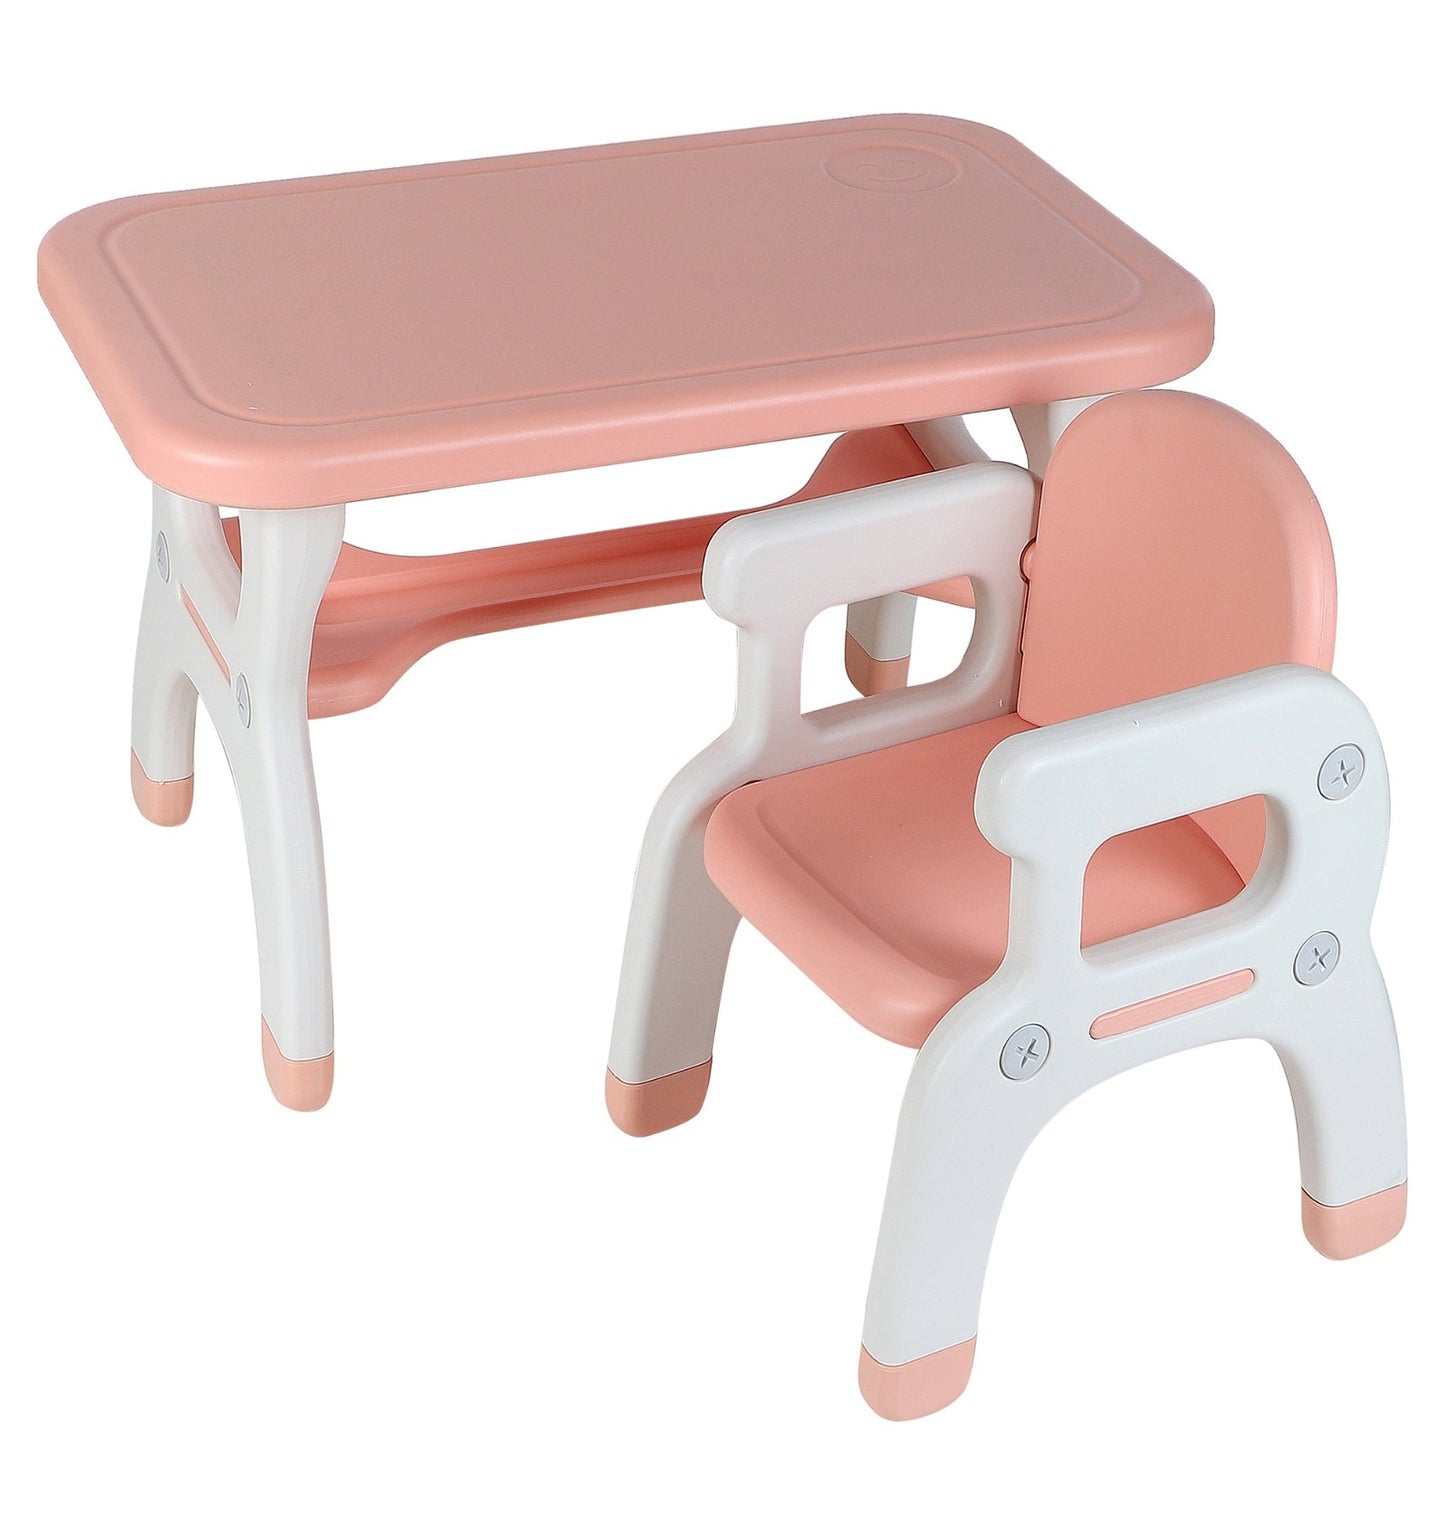 Table Chair with Storage Orange